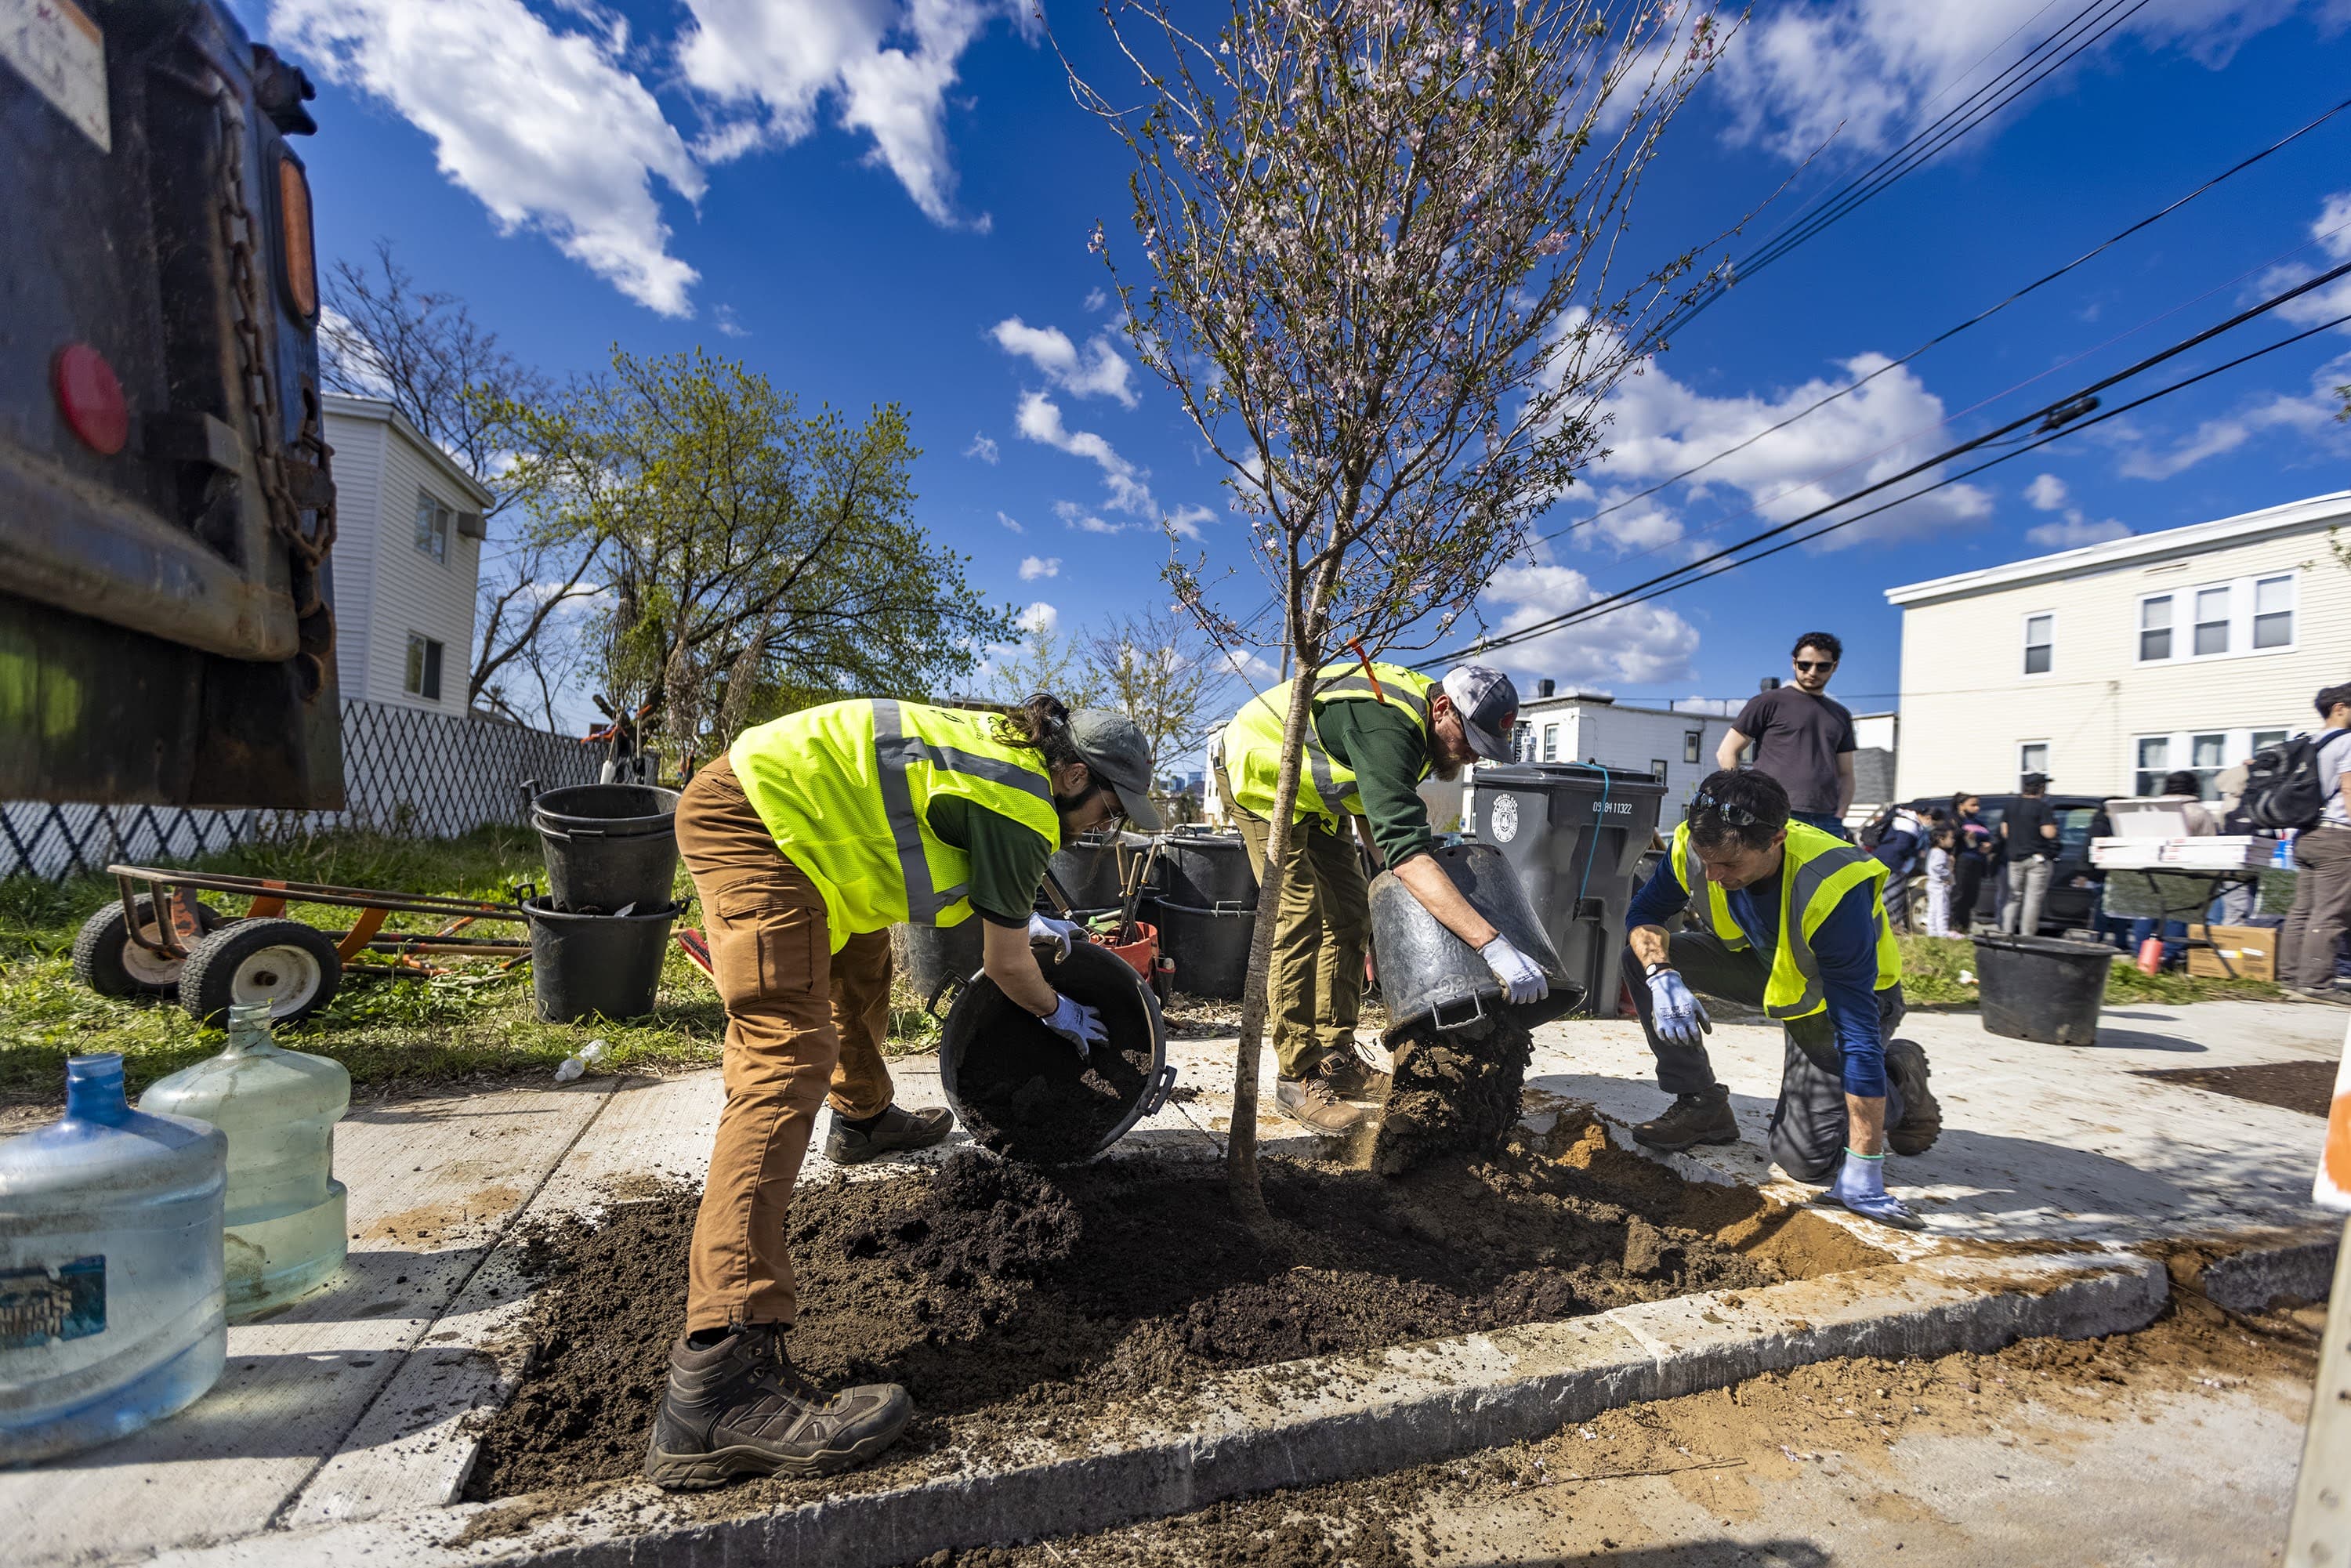 Members of the DCR's Urban and Community Forestry Program plant a cherry tree on Maverick Street in Chelsea, part of the “Chelsea Cool Block” project to help mitigate urban heat in the city. (Jesse Costa/WBUR)